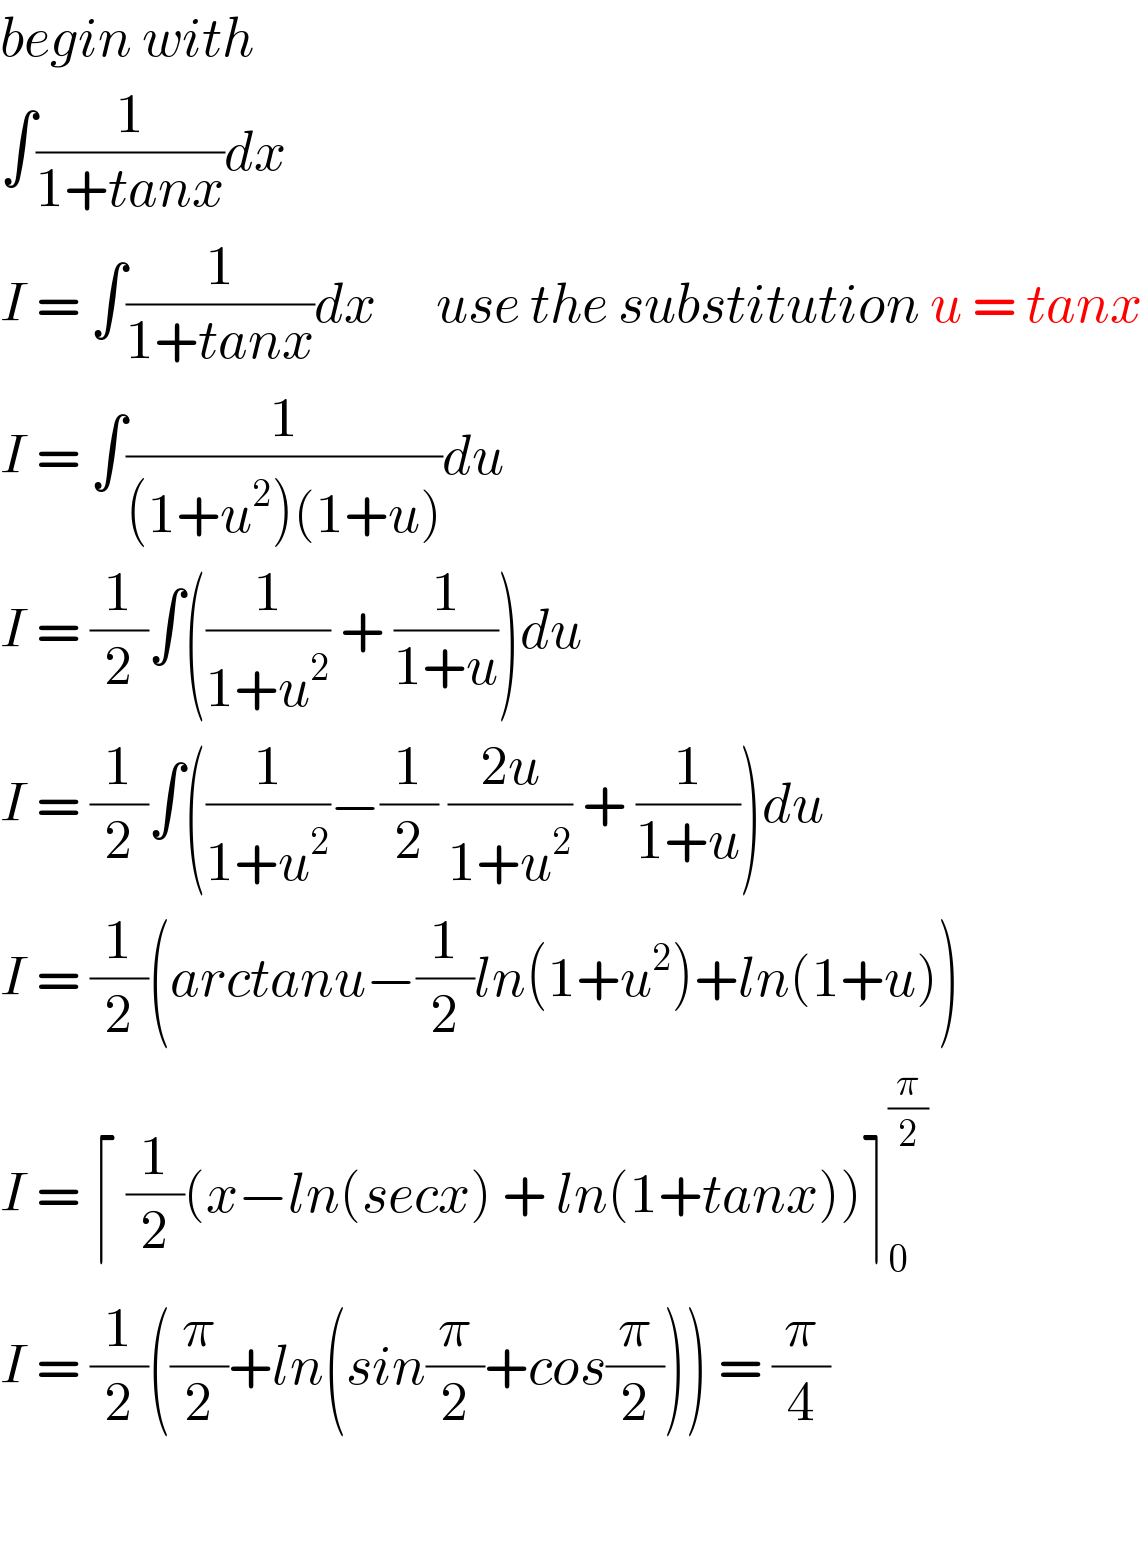 begin with  ∫(1/(1+tanx))dx  I = ∫(1/(1+tanx))dx      use the substitution u = tanx  I = ∫(1/((1+u^2 )(1+u)))du  I = (1/2)∫((1/(1+u^2 )) + (1/(1+u)))du  I = (1/2)∫((1/(1+u^2 ))−(1/2) ((2u)/(1+u^2 )) + (1/(1+u)))du  I = (1/2)(arctanu−(1/2)ln(1+u^2 )+ln(1+u))  I = ⌈ (1/2)(x−ln(secx) + ln(1+tanx))⌉_0 ^(π/2)   I = (1/2)((π/2)+ln(sin(π/2)+cos(π/2))) = (π/4)    